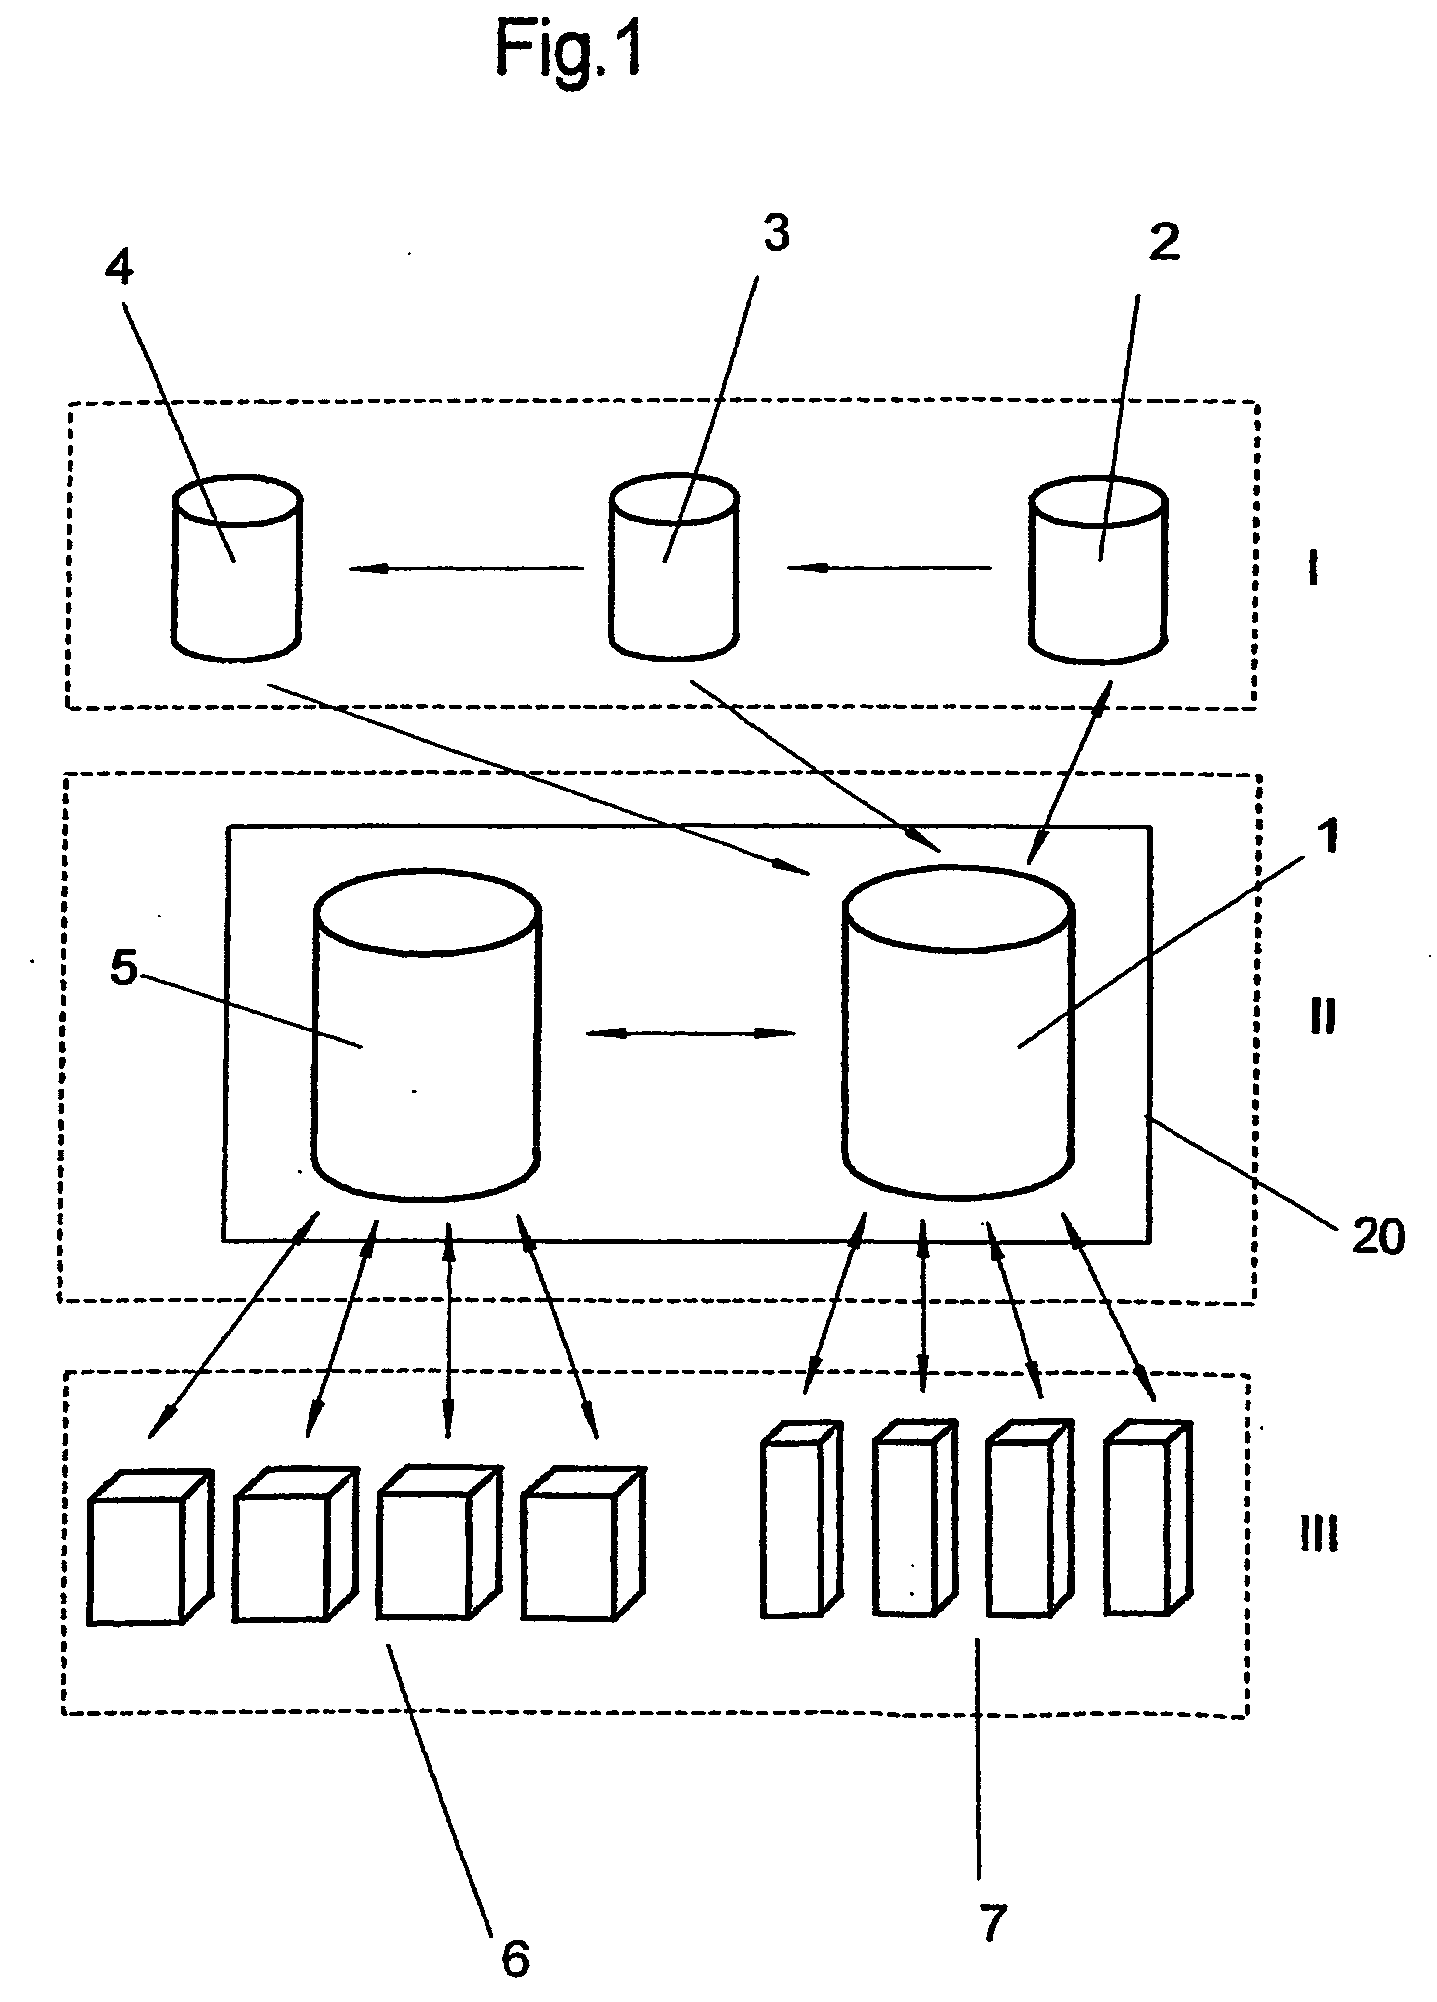 Method and device for control of the data flow on application of reticles in a semiconductor component production